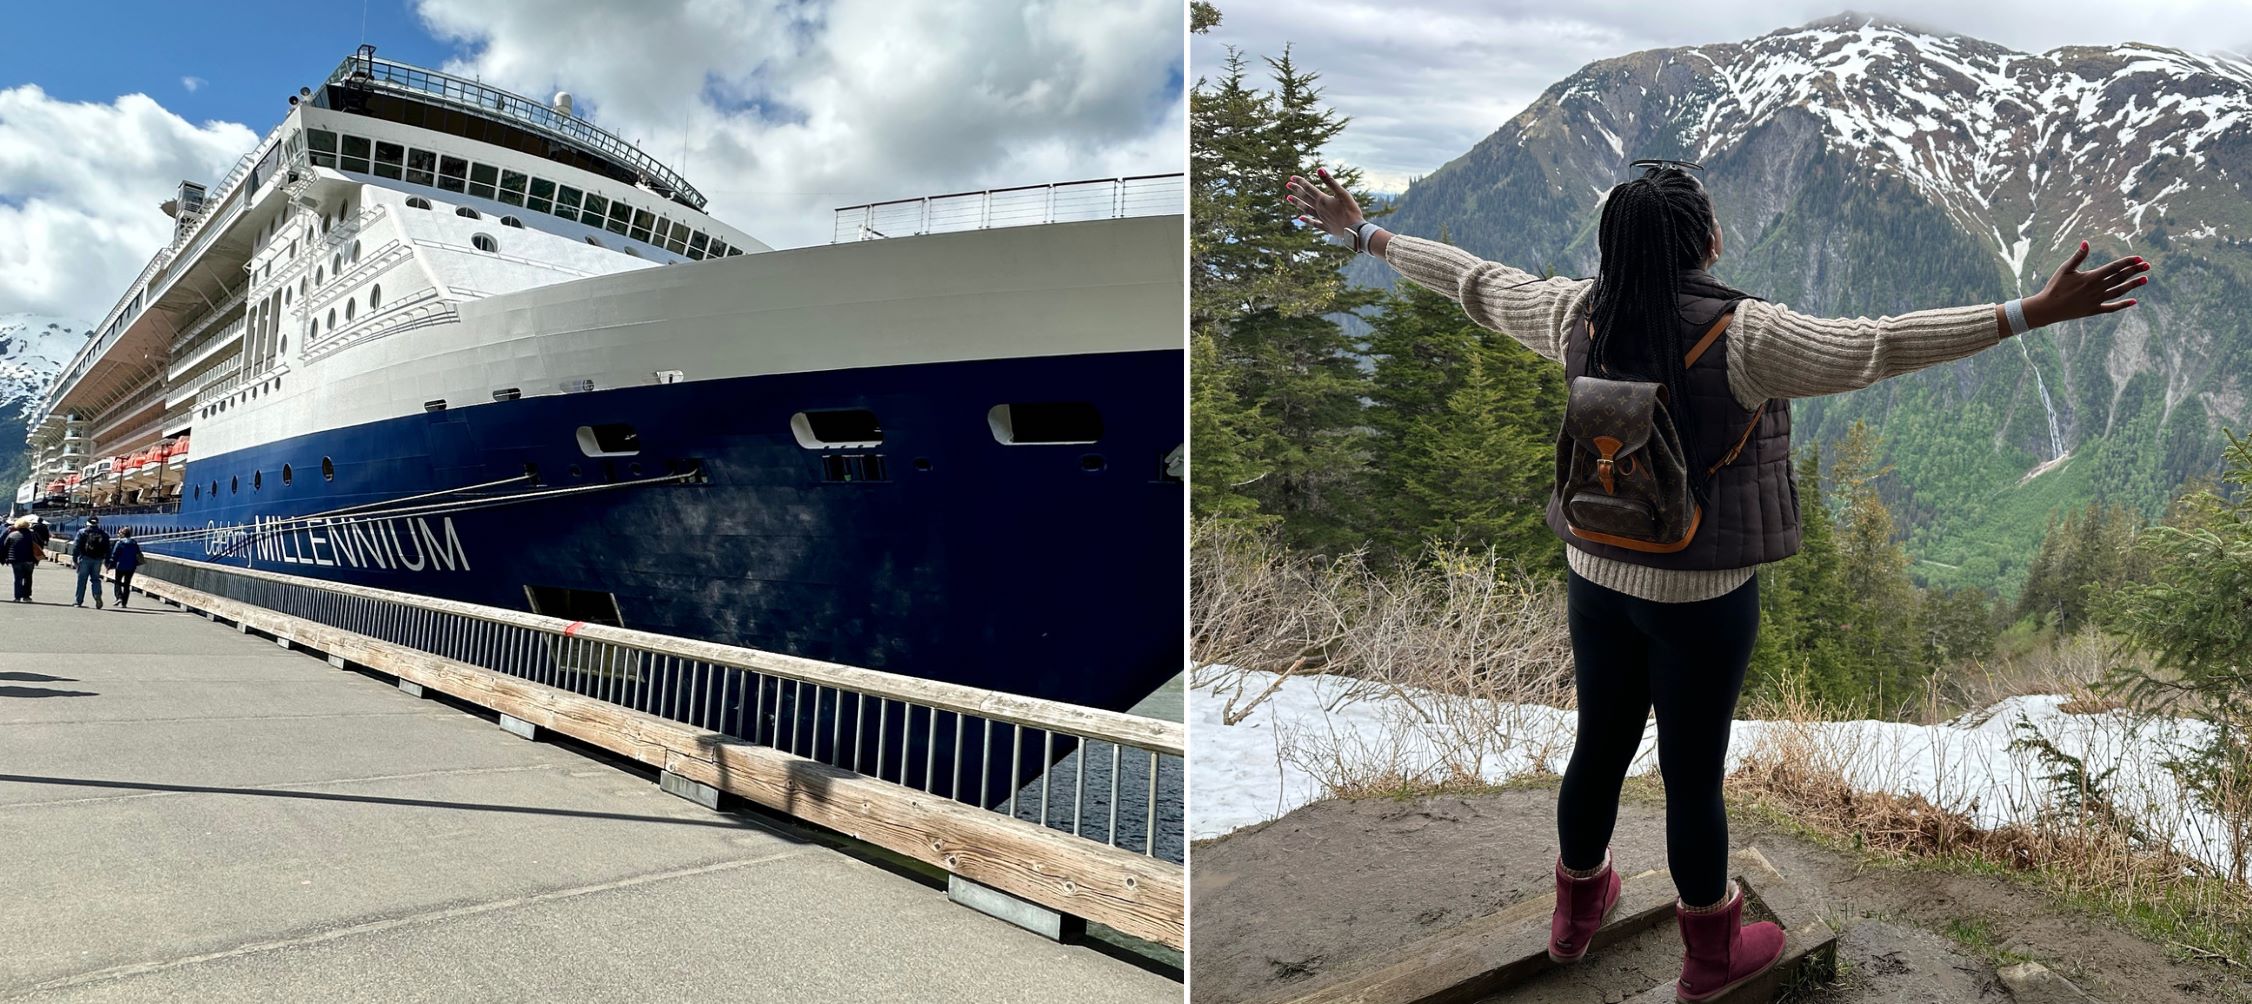 An image of a cruise ship and lifestyle blogger Ariel in Alaska on her Alaska cruise.